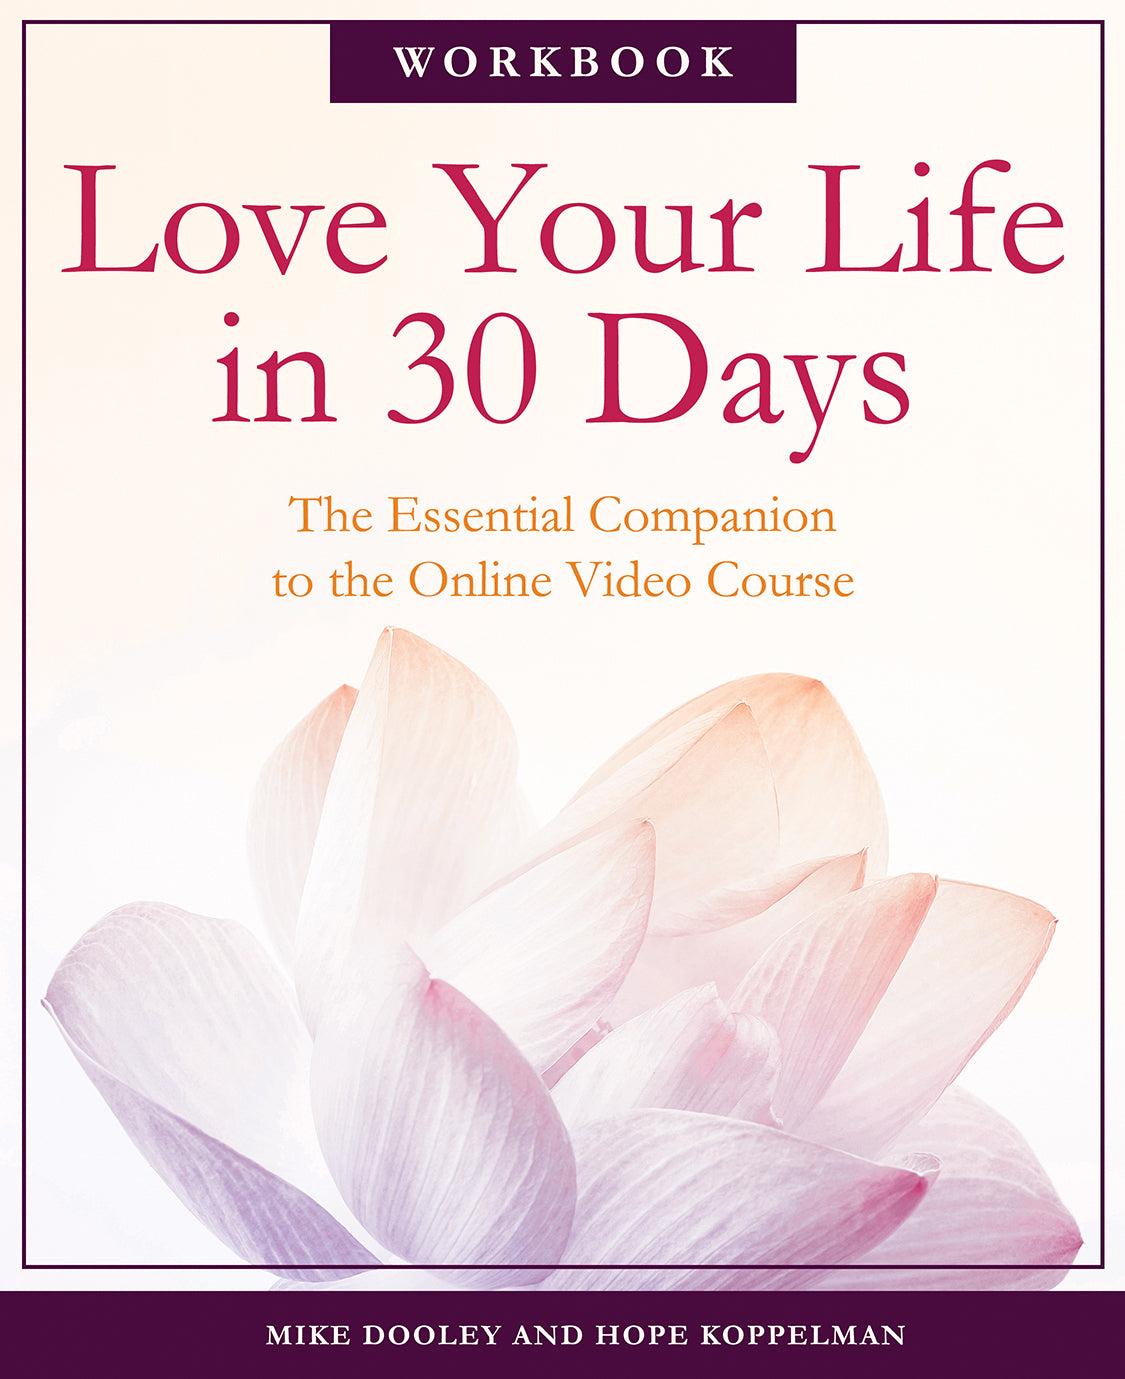 Love Your Life in 30 Days Workbook